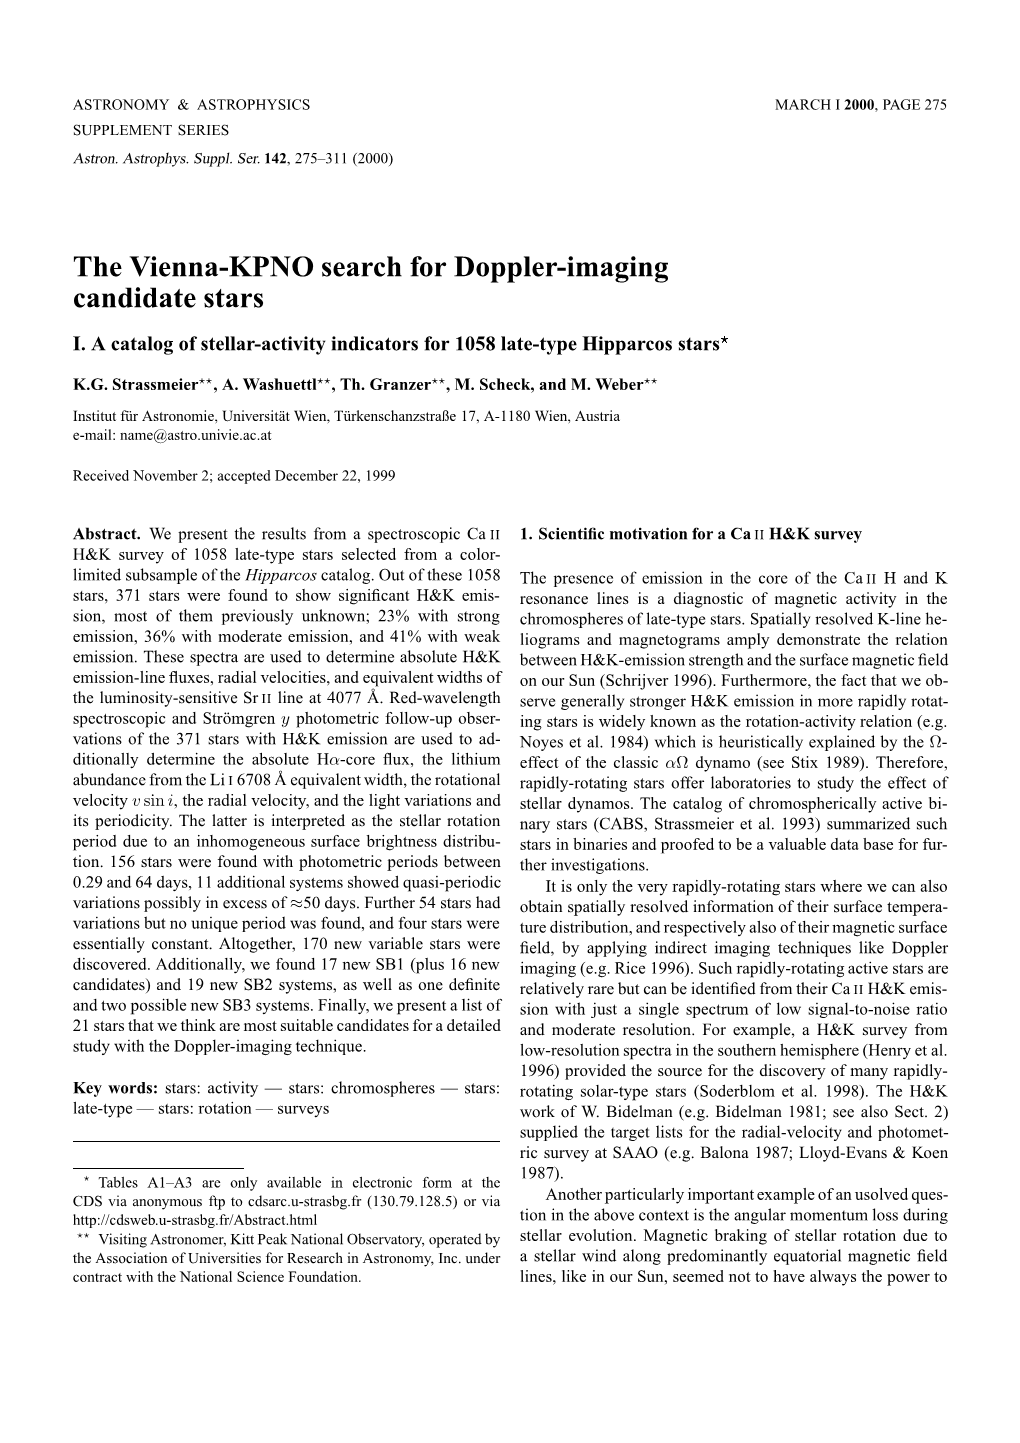 The Vienna-KPNO Search for Doppler-Imaging Candidate Stars